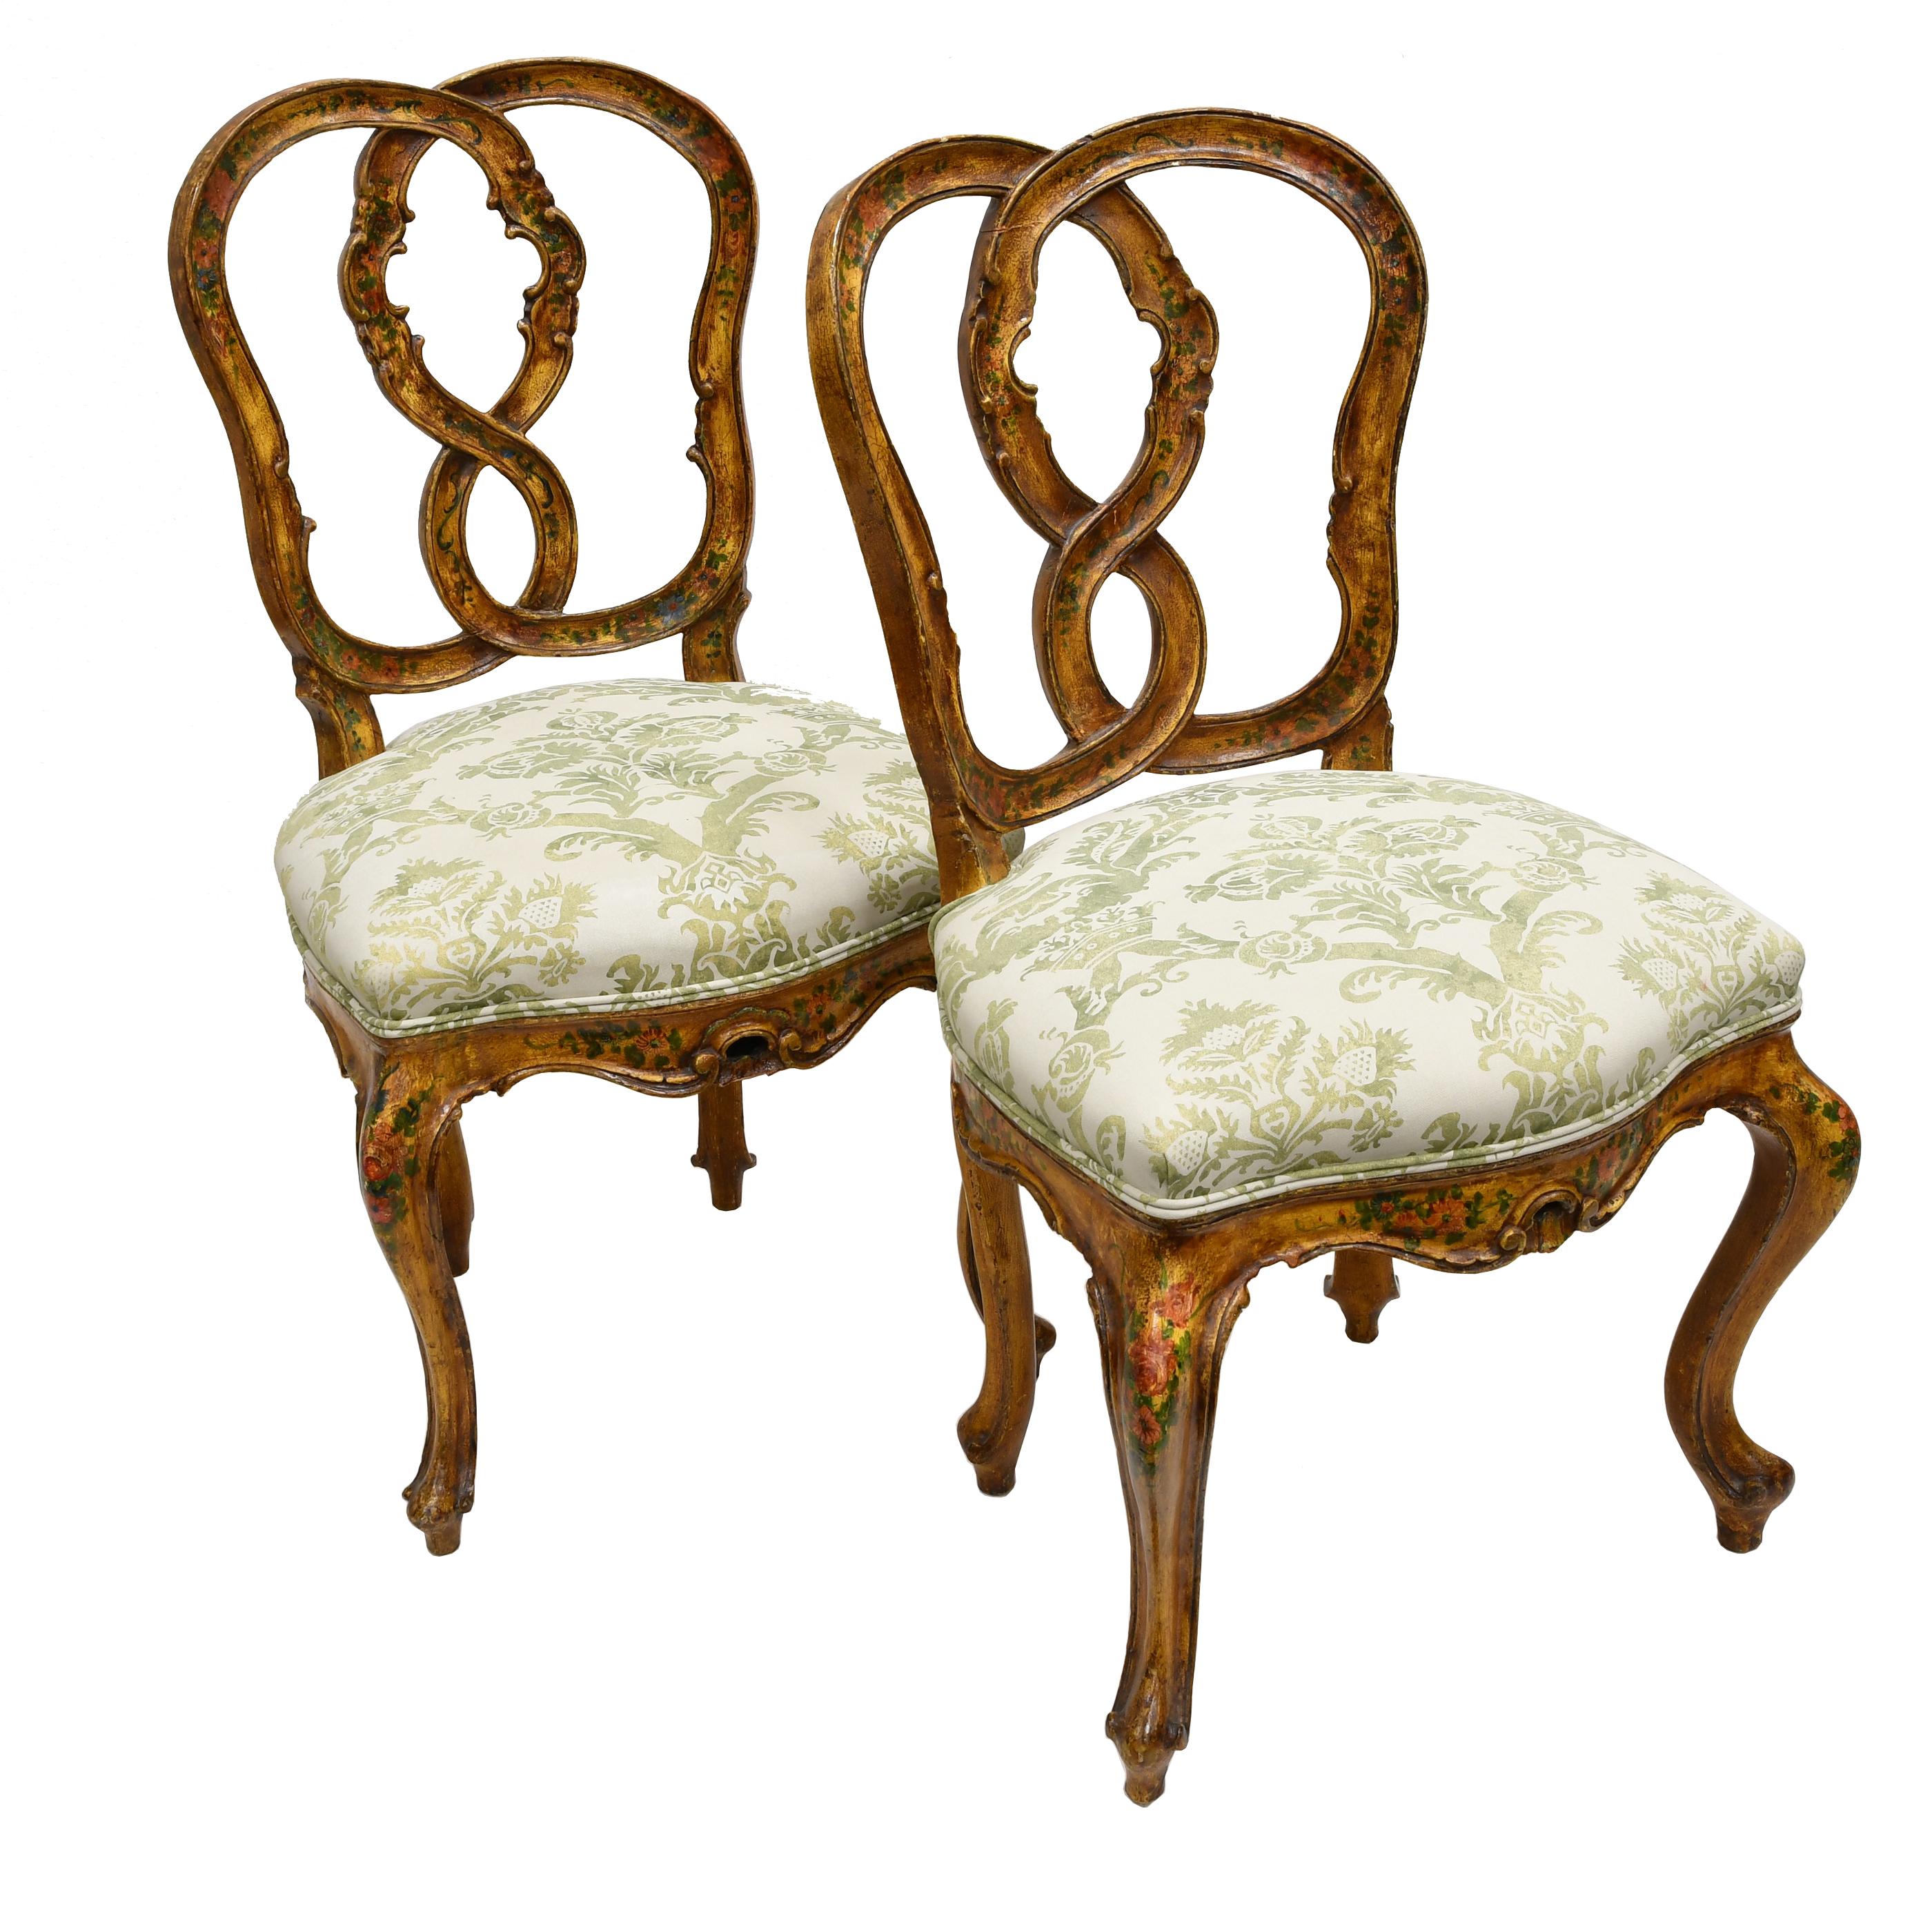 Wood Pair of Antique Venetian Dining Chairs in Yellow Paint with Flowers & Upholstery